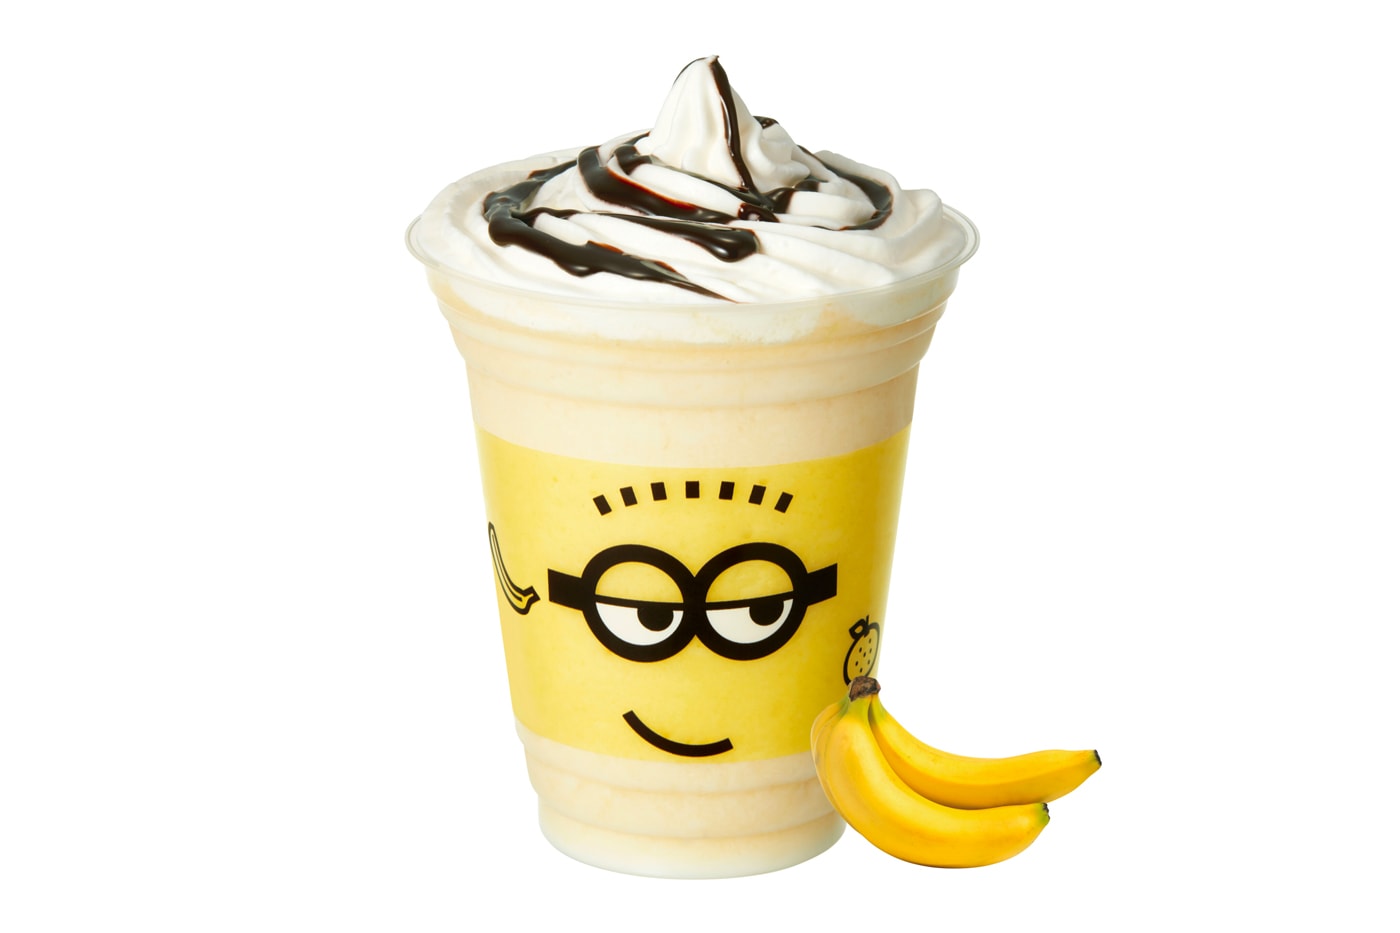 Krispy Kreme Japan Celebrates the Minions' Love for Bananas in New Donuts Series snacks sweets banana sweets desserts chocolate smoothie 